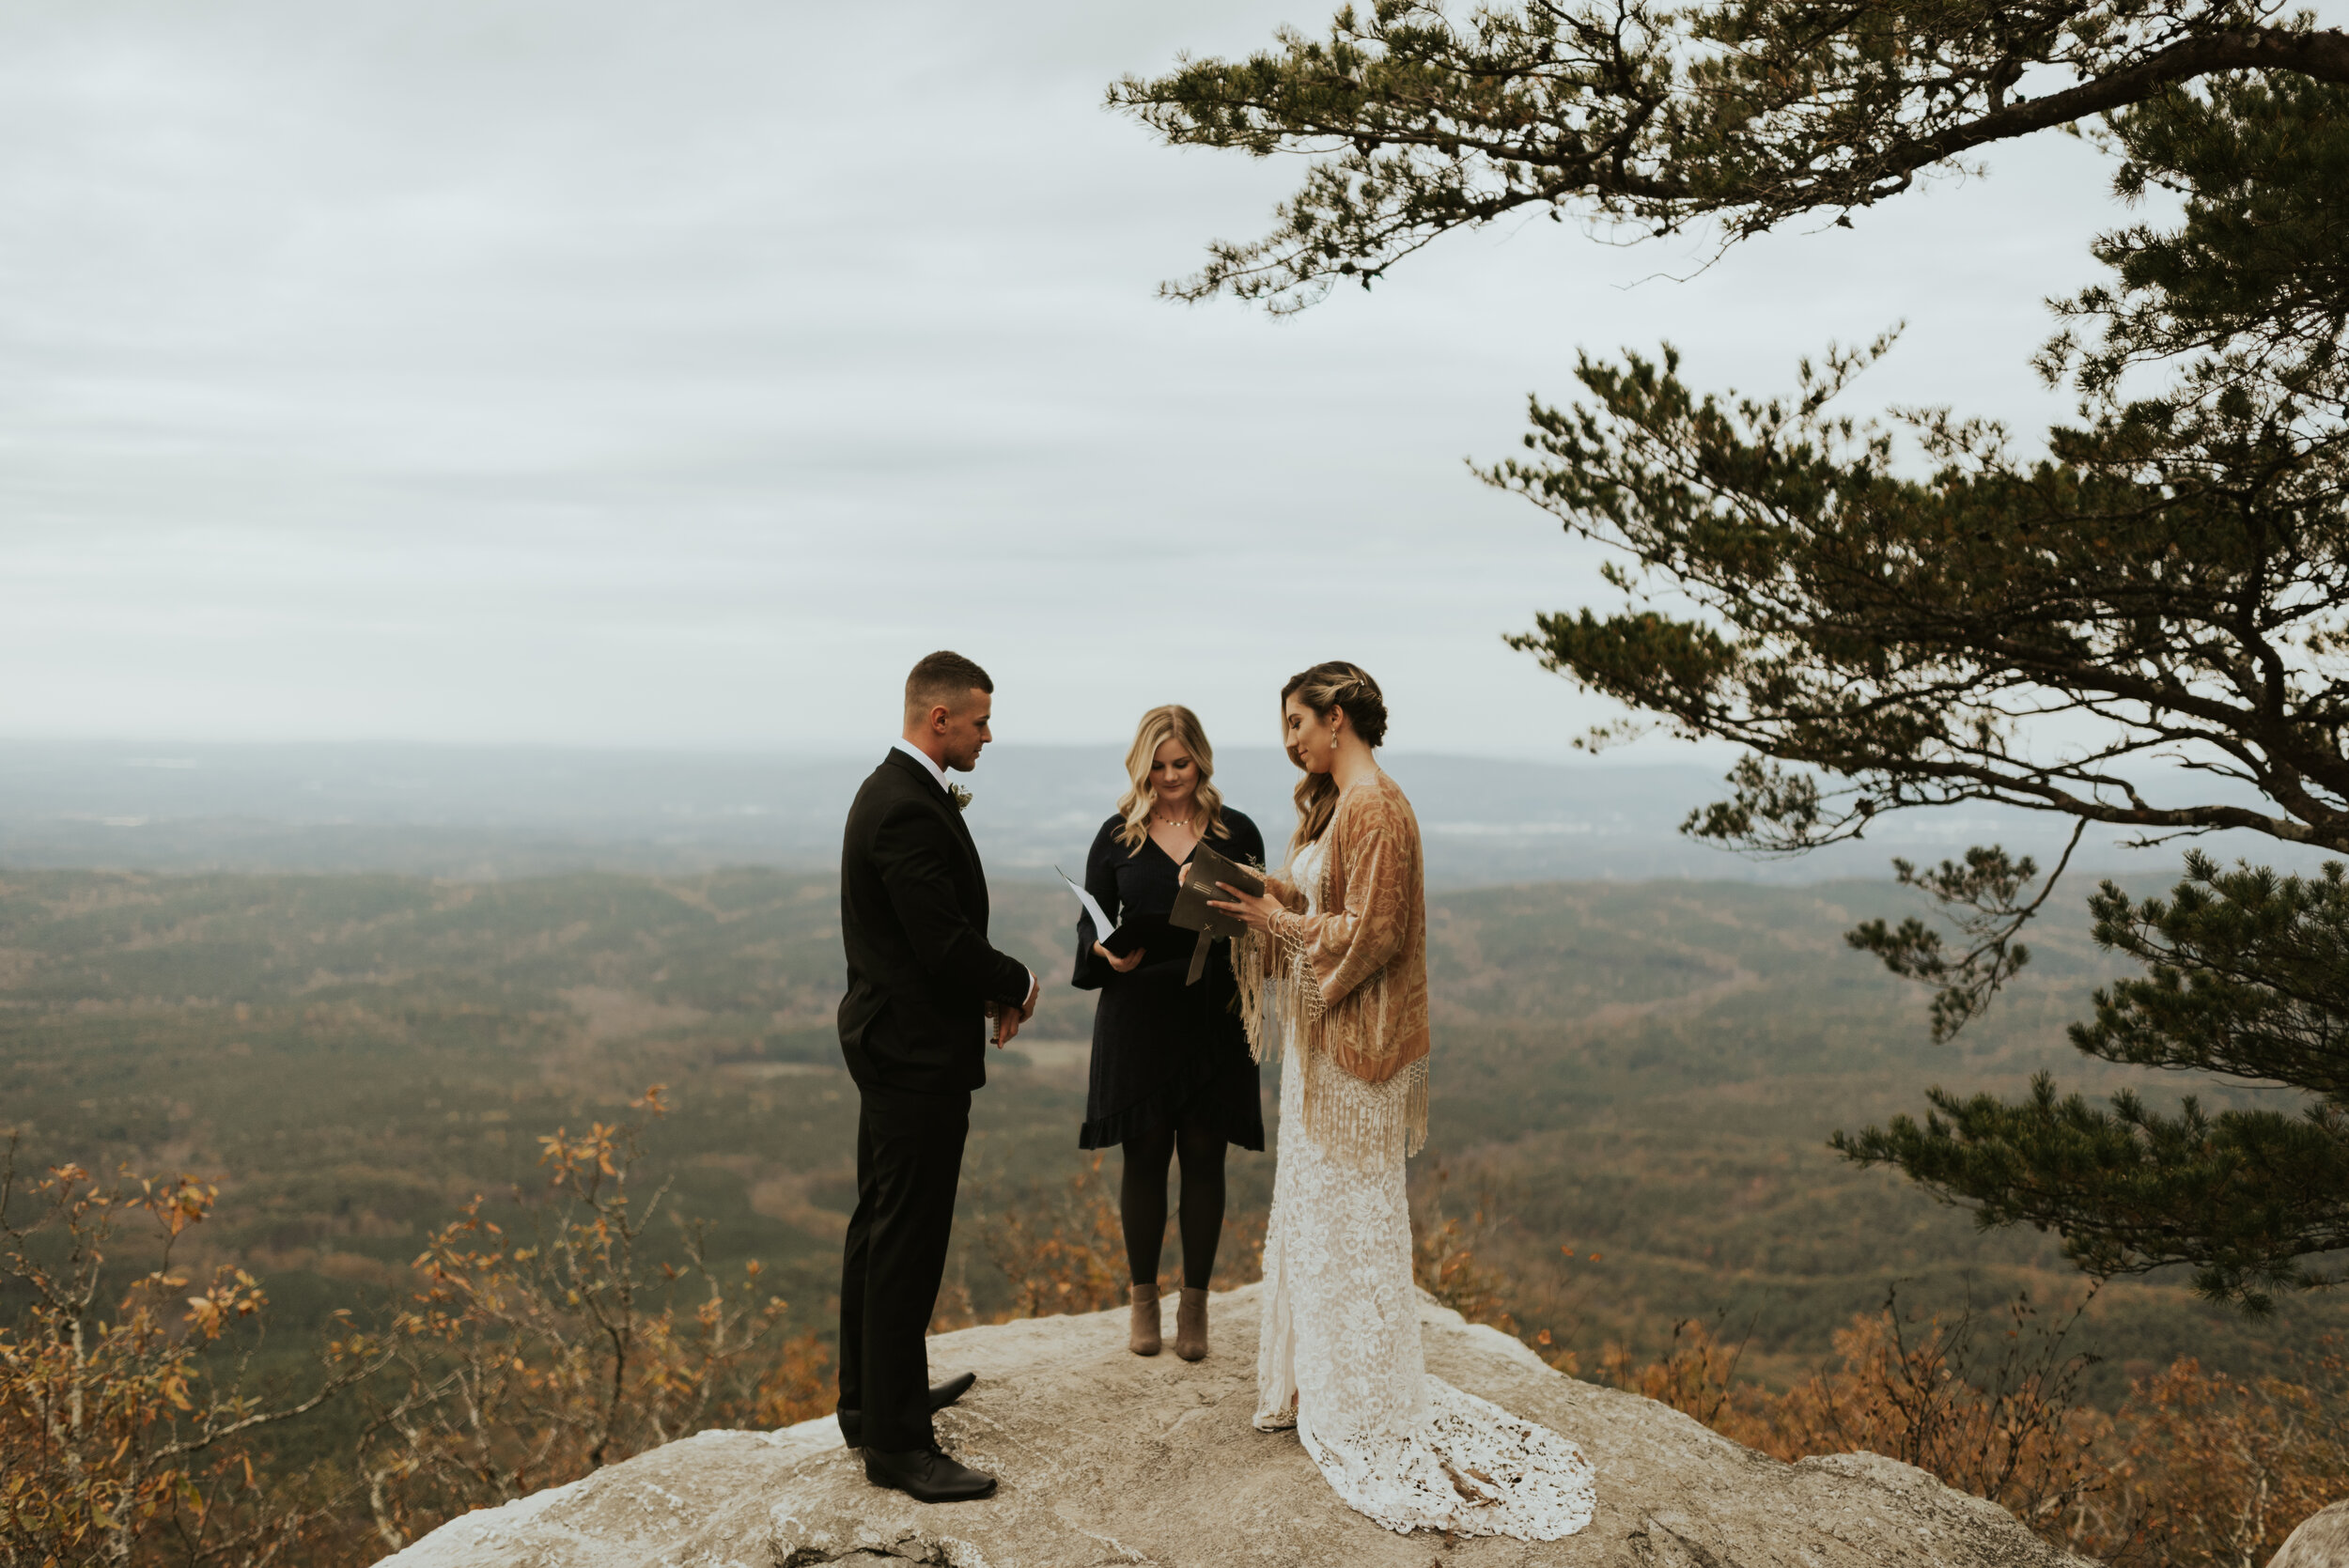 Top Reasons To Elope What Eloping Is Why It Might Be Right For You Dakota Chasity Alabama Wedding Adventure Elopement Photographer,About Home